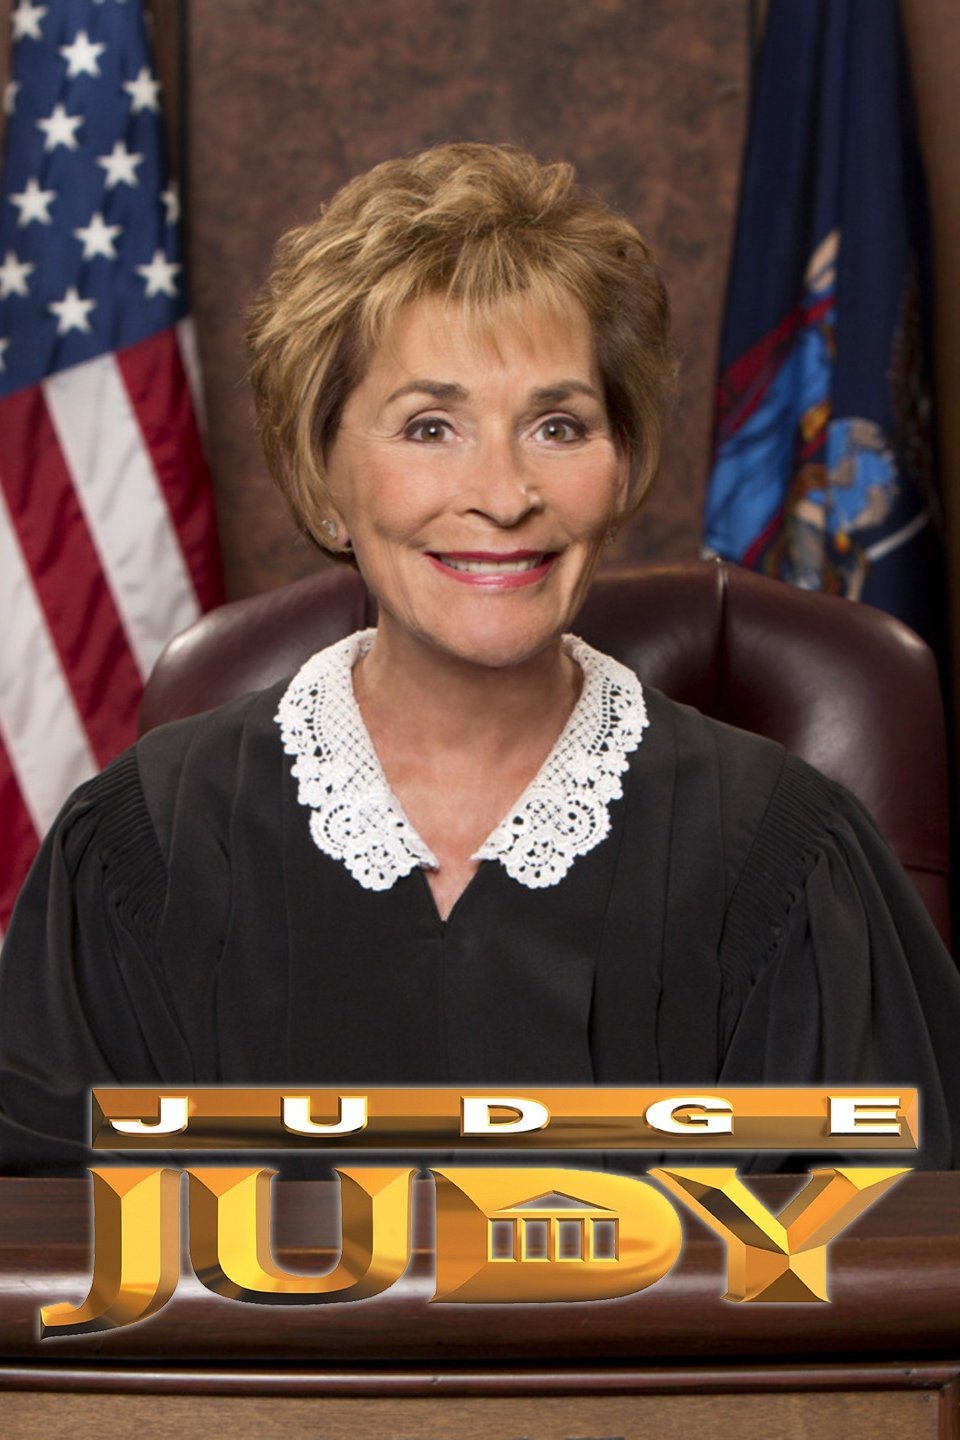 Judge Judy The Computer Tech Your Daily Distraction